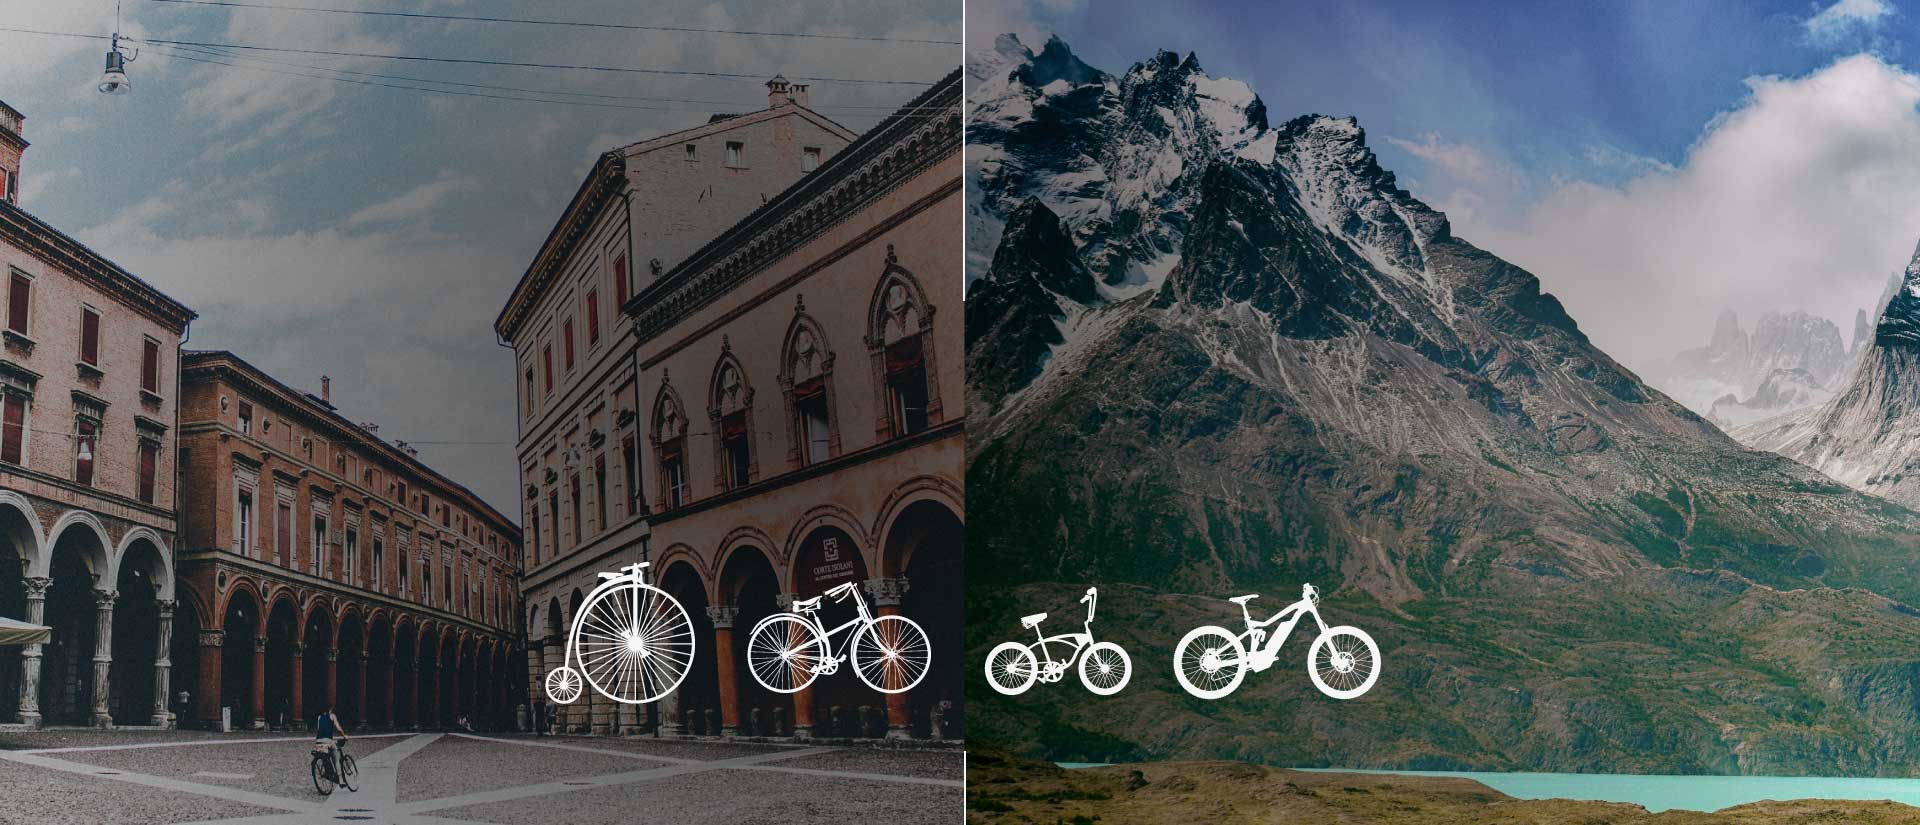 The evolution of bicycles